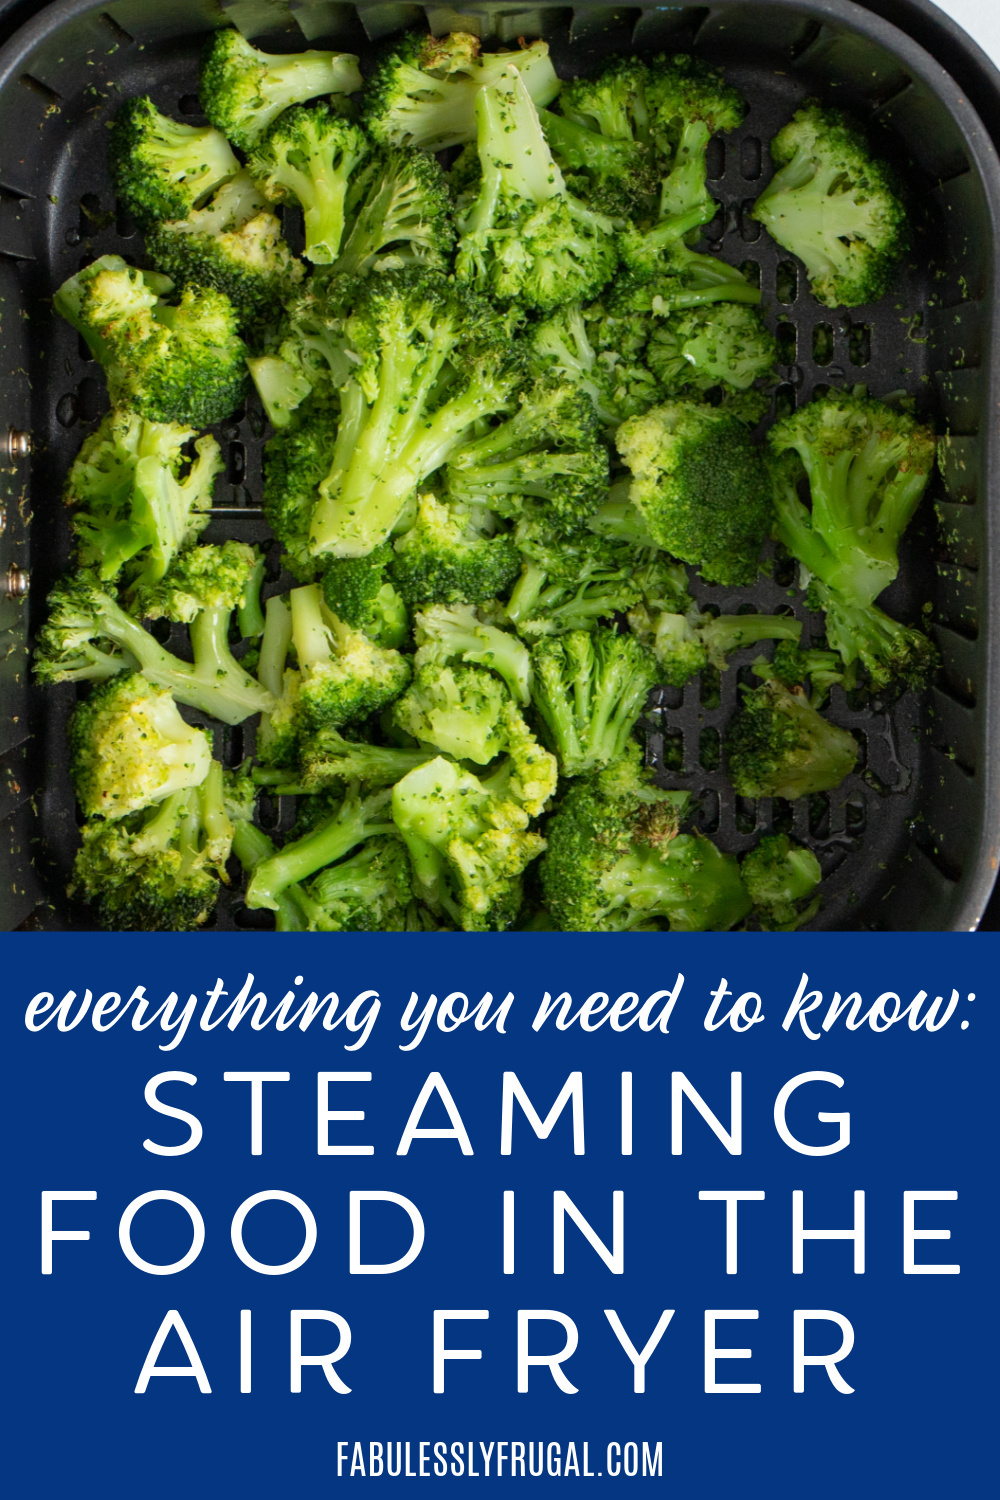 https://fabulesslyfrugal.com/wp-content/uploads/2023/03/everything_you_need_to_know_about_steaming_food_in_the_air_fryer-2.jpeg